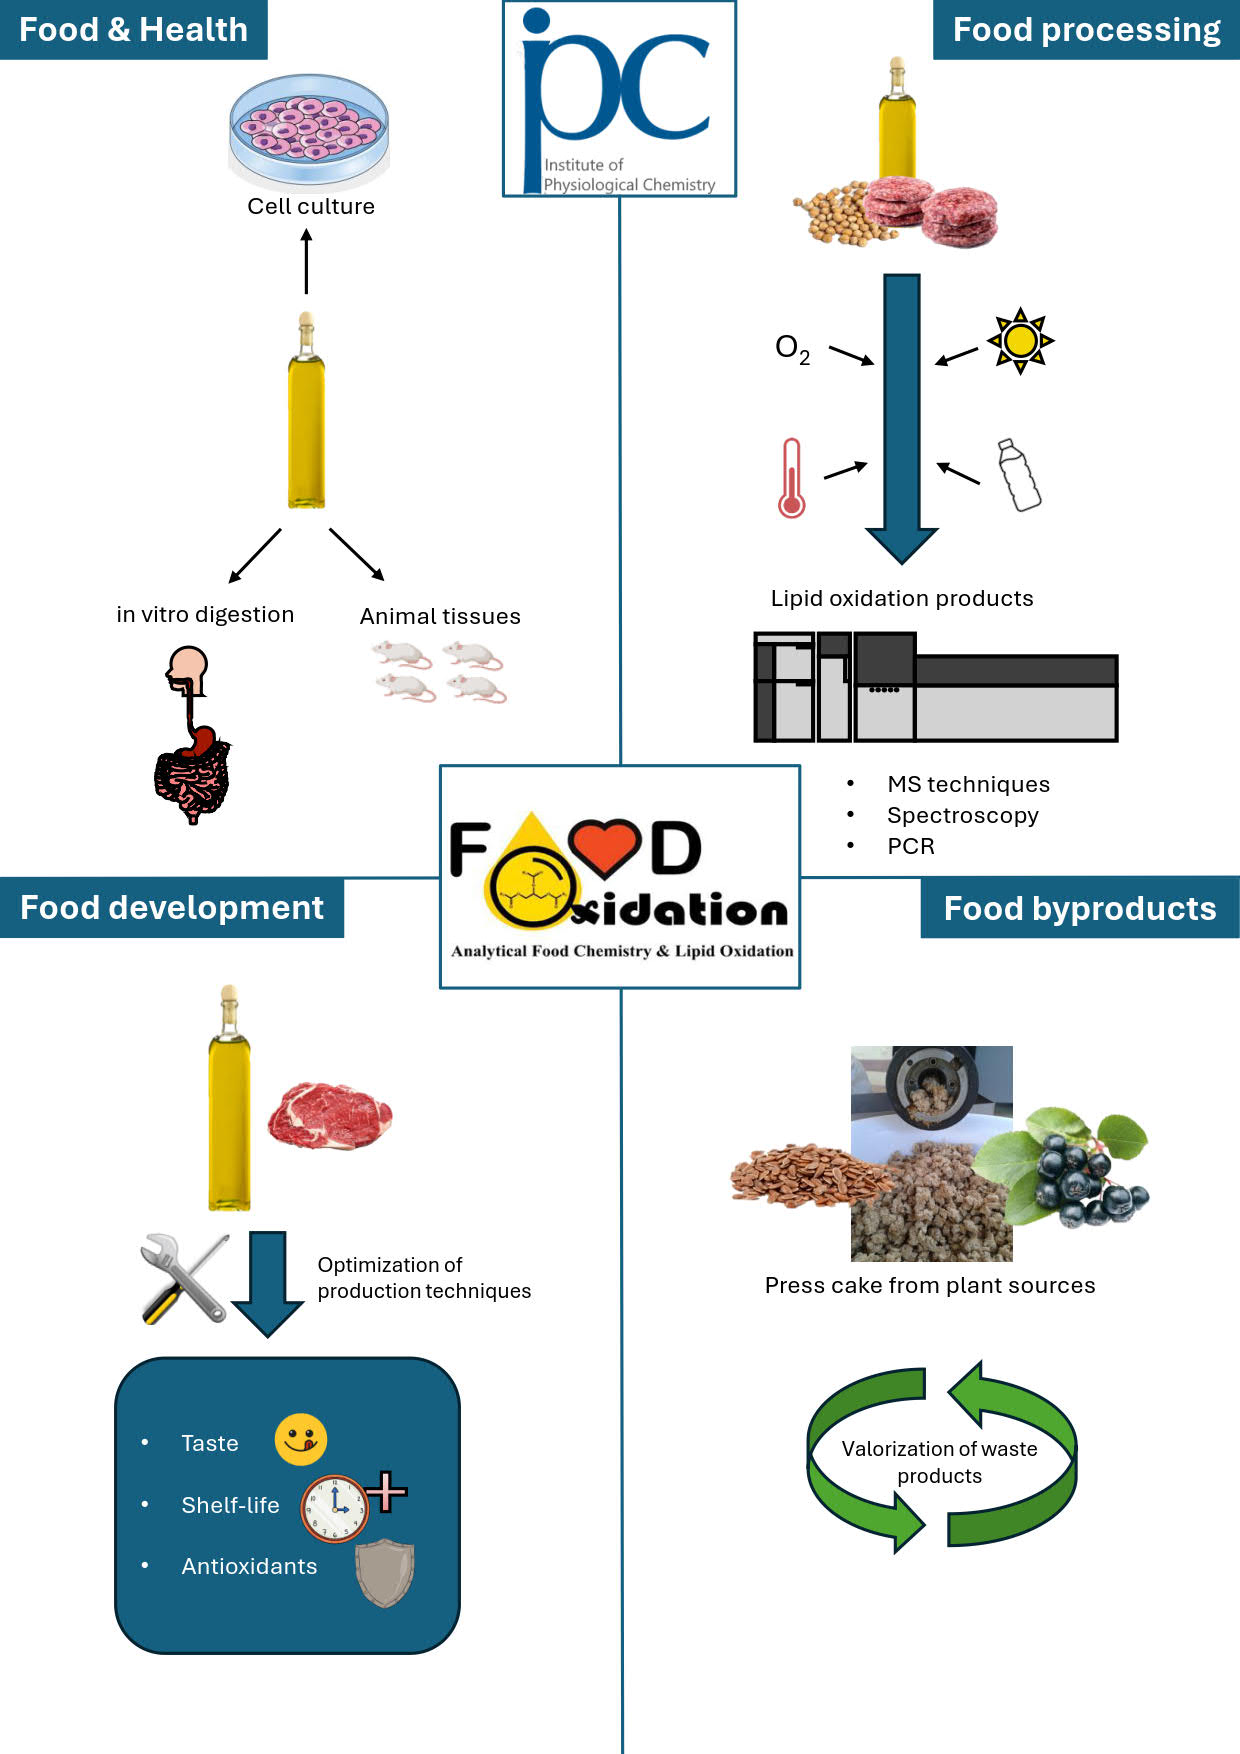 entation of the Analytic Food Chemistry